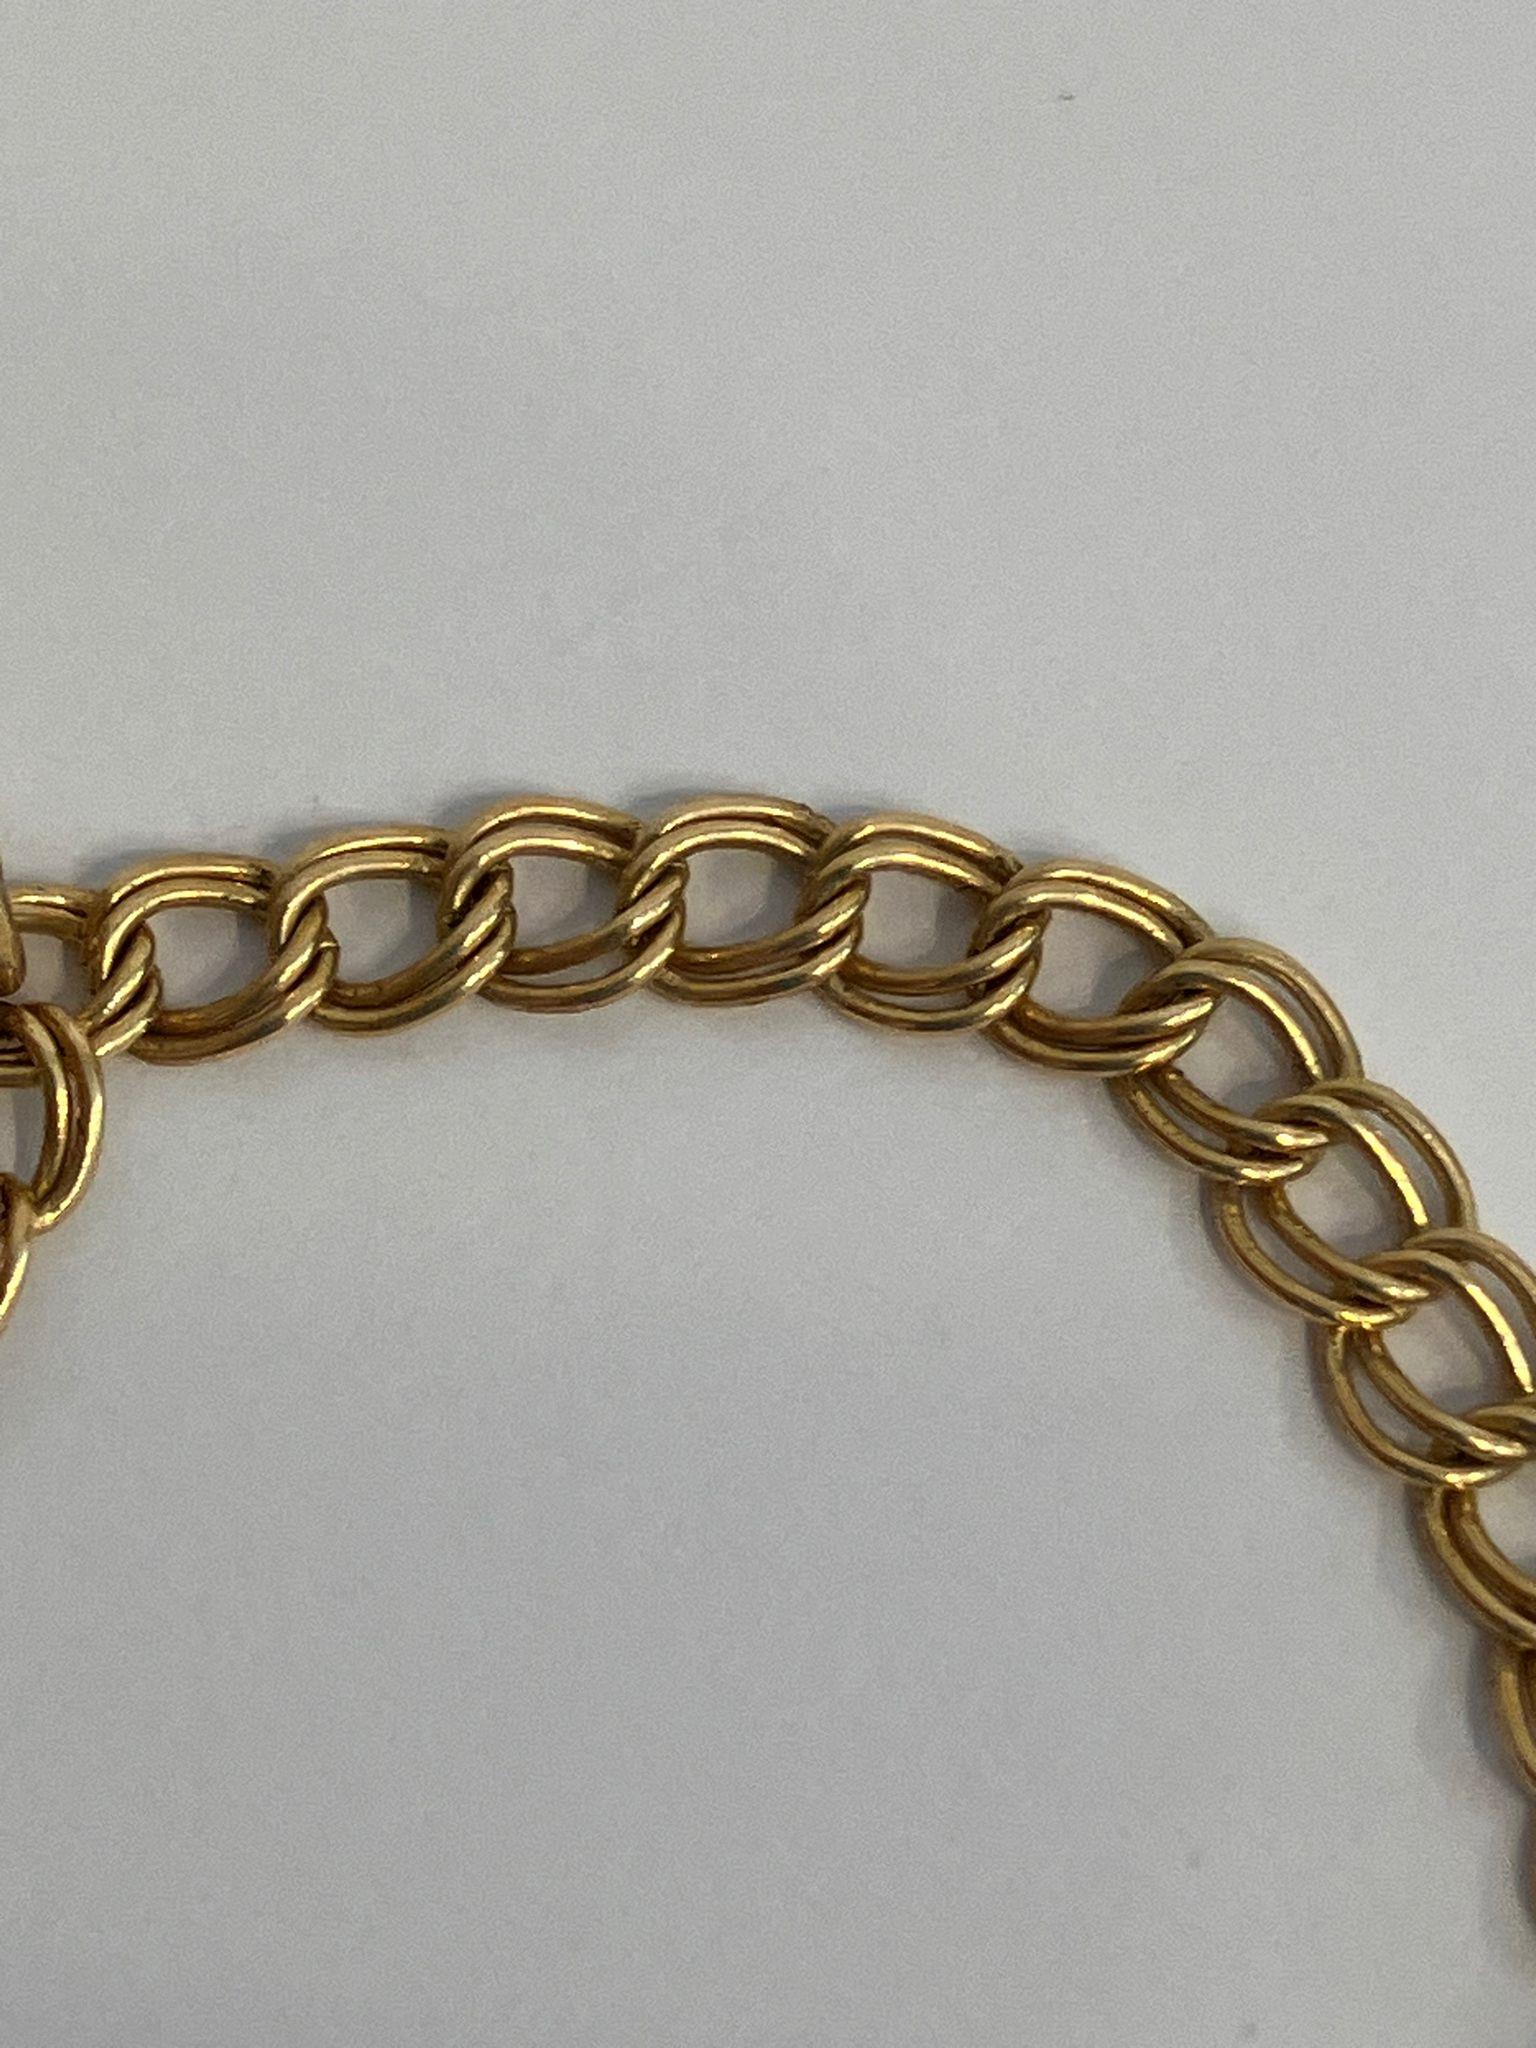 9 carat GOLD DOUBLE LINK BRACELET. Complete with safety chain and having Heart Padlock fastening - Image 2 of 2